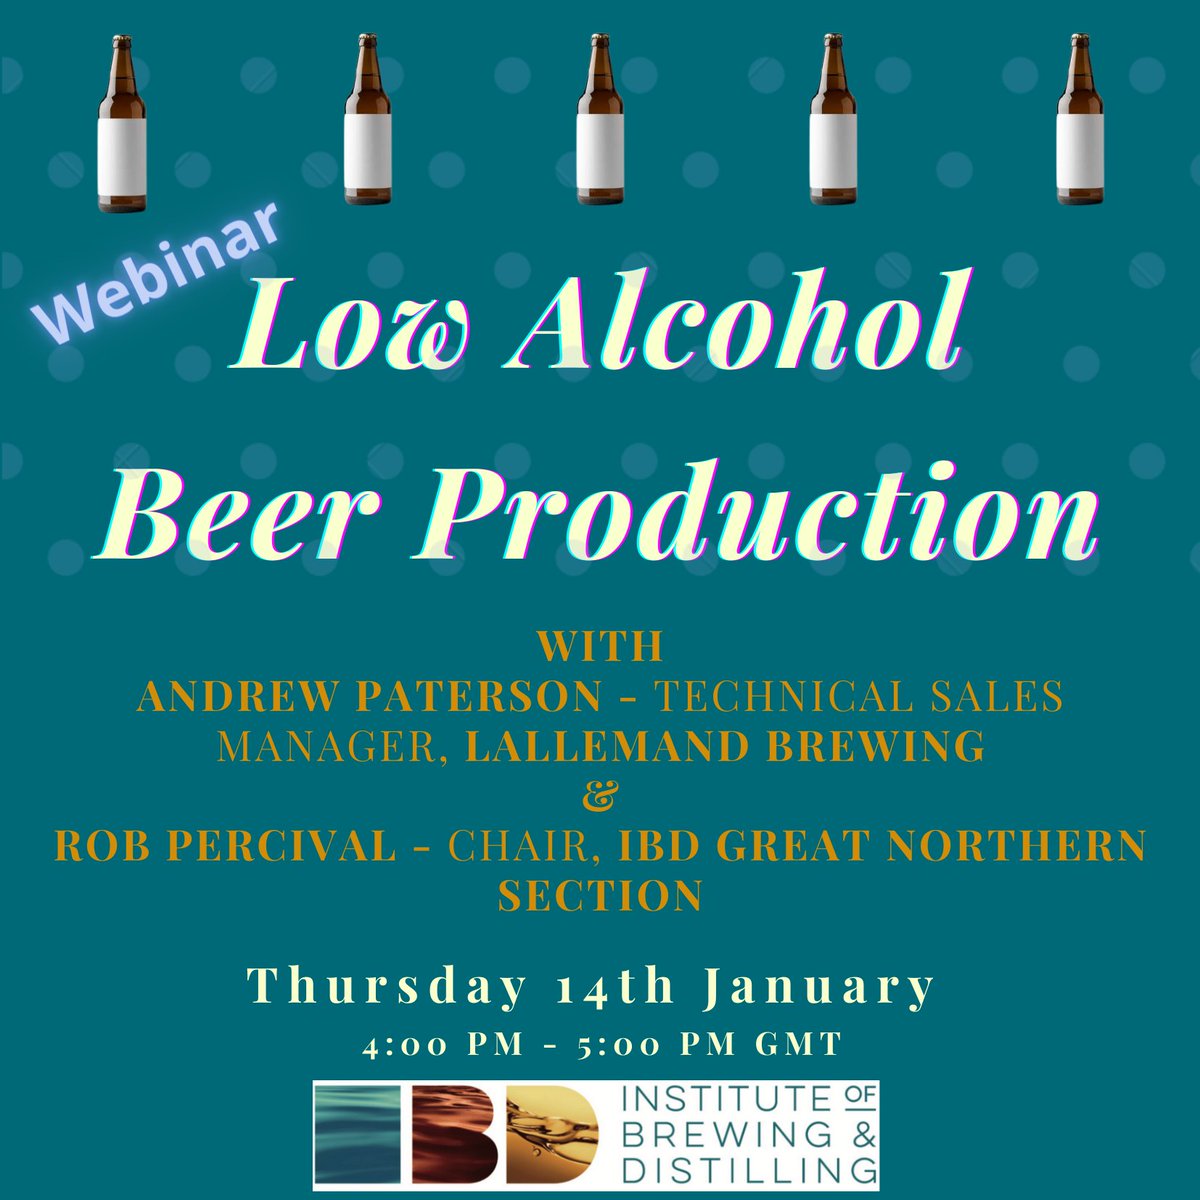 Here it's our first webinar of 2021. Keep up with innovation and join us in this week’s session. bit.ly/3sschjk
#beer #brewers #brewing #beerproduction #beermaking #lowalcoholdrinks #lowalcoholbeer #production #yeast #learning #development #innovation #webinar